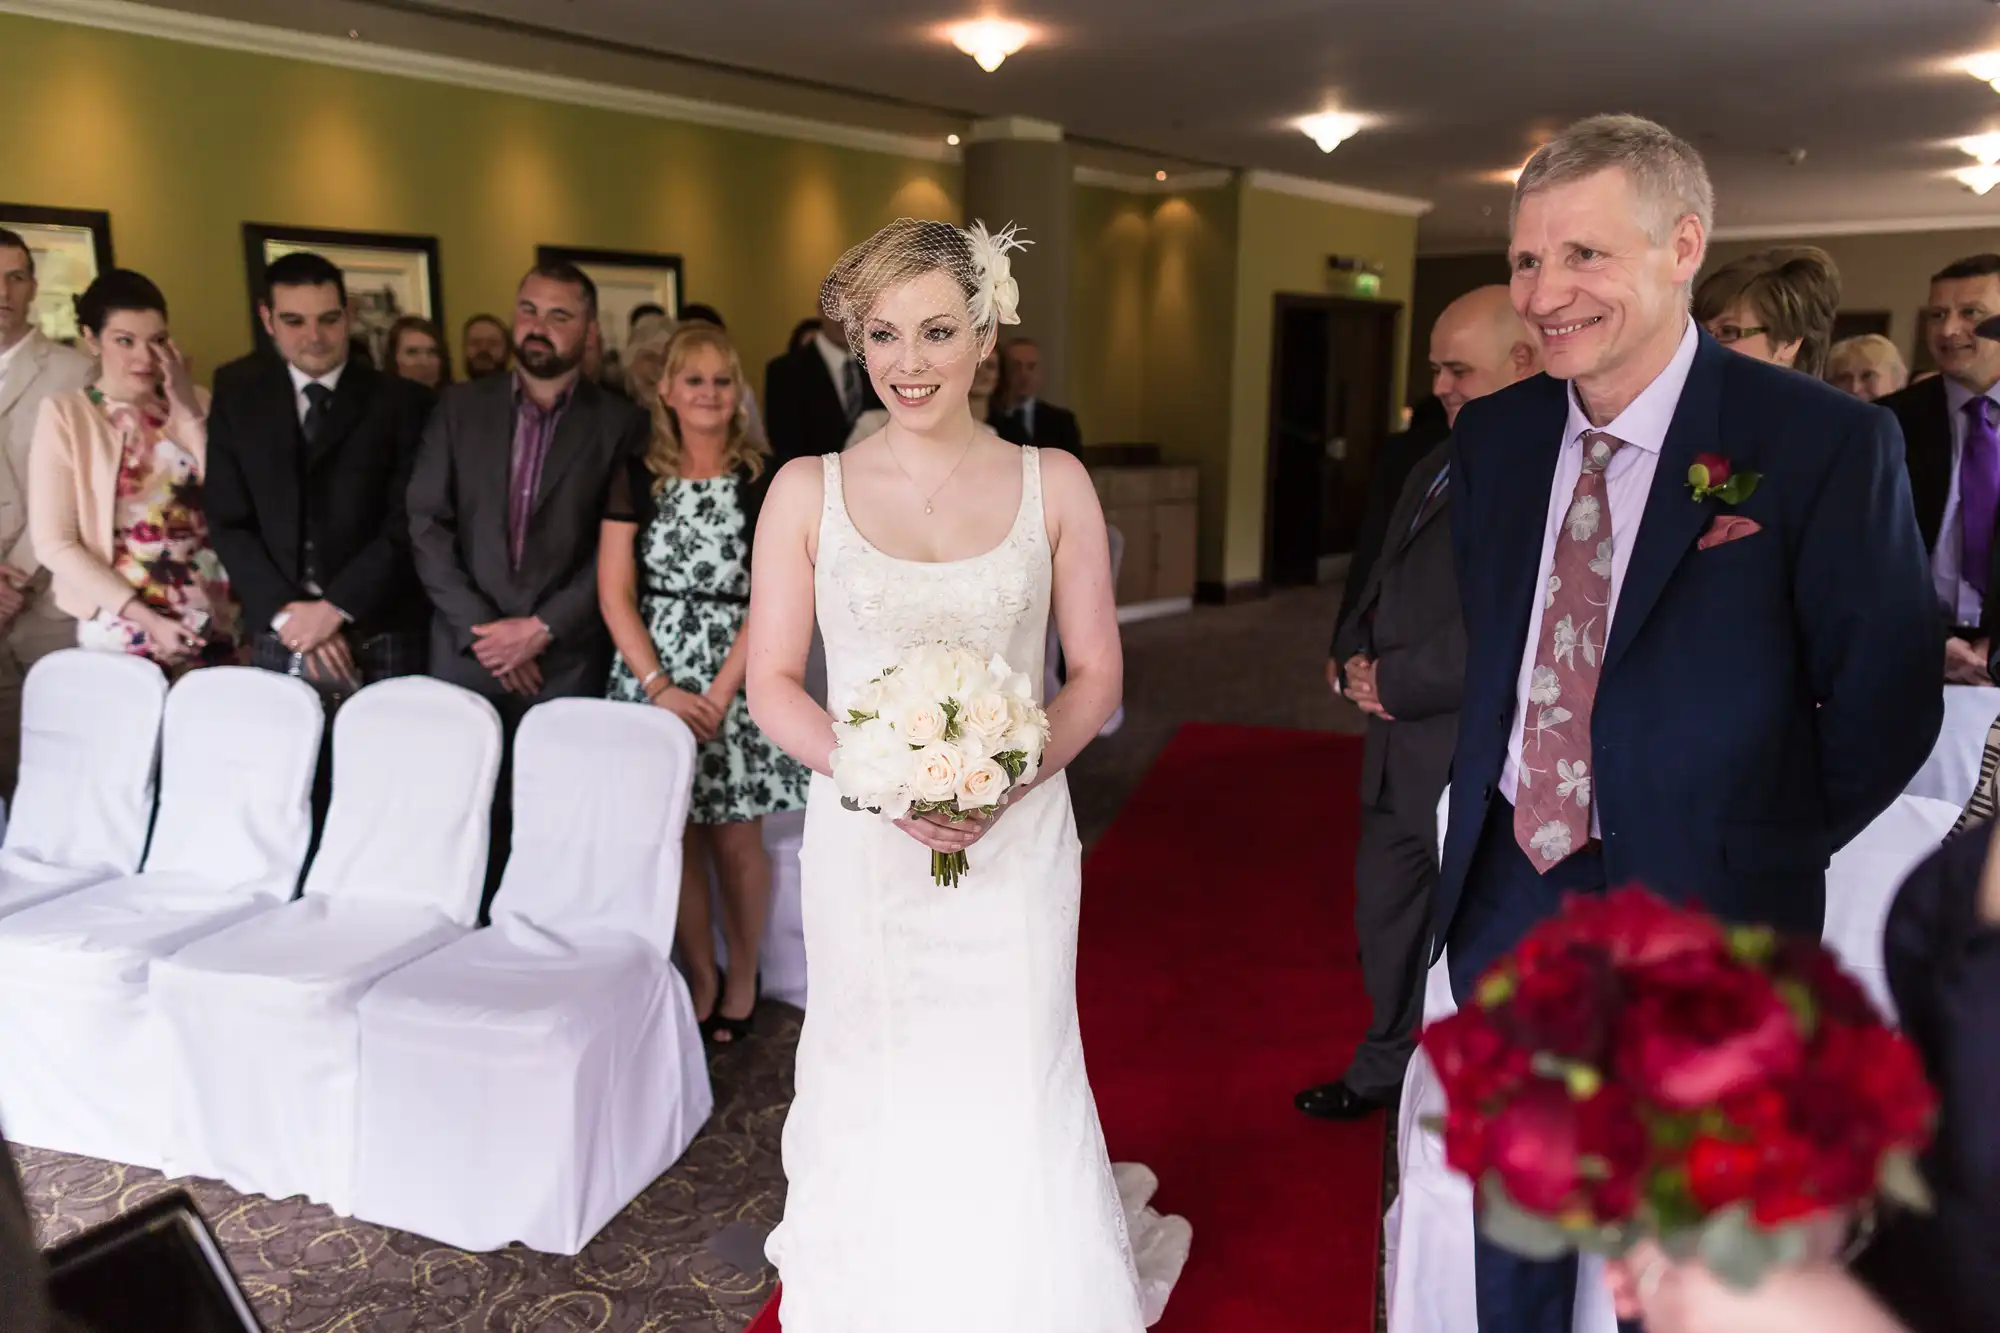 A bride in a white dress and a man in a suit walk down an aisle, smiling, with guests on either side in a wedding hall.